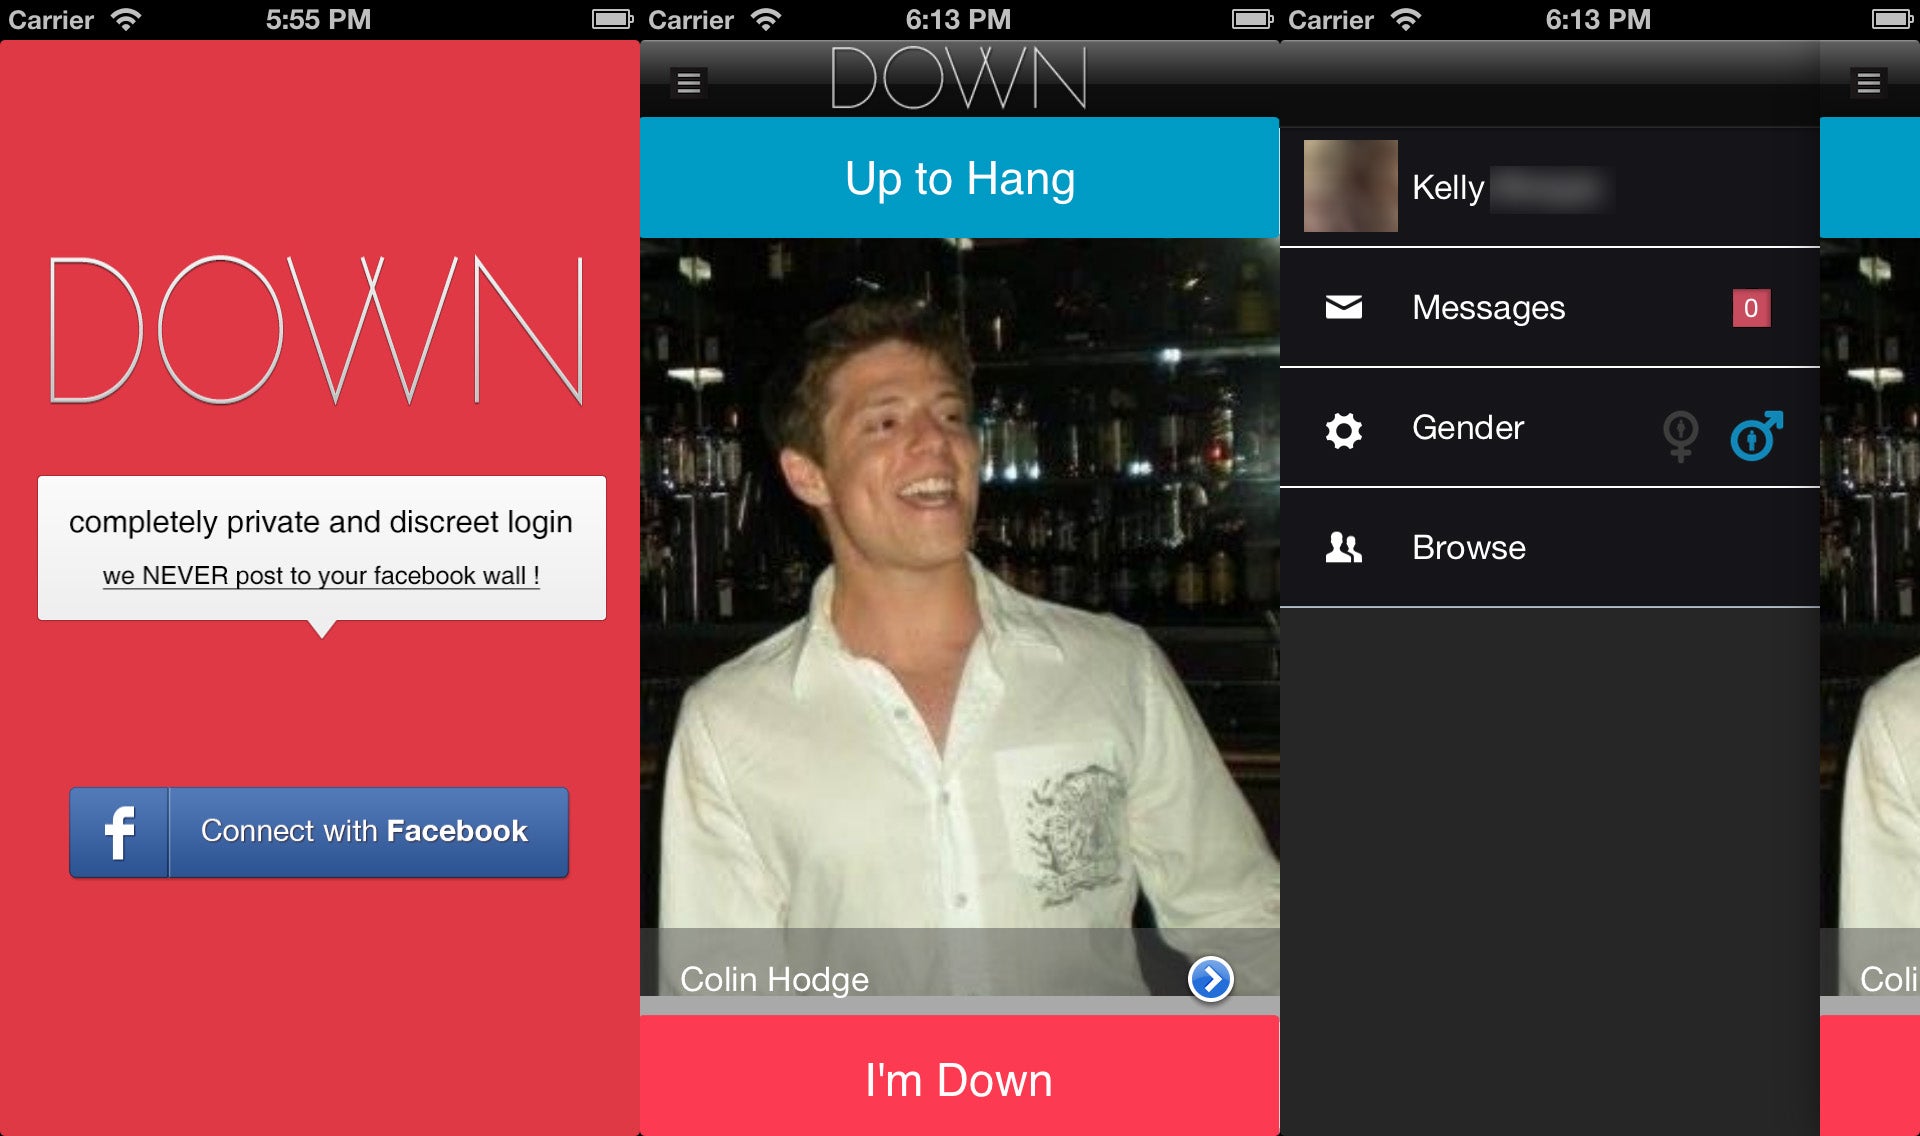 The relaunched 'Bang With Friends' allows users to indicate if they want to 'Hang' with Facebook friends.